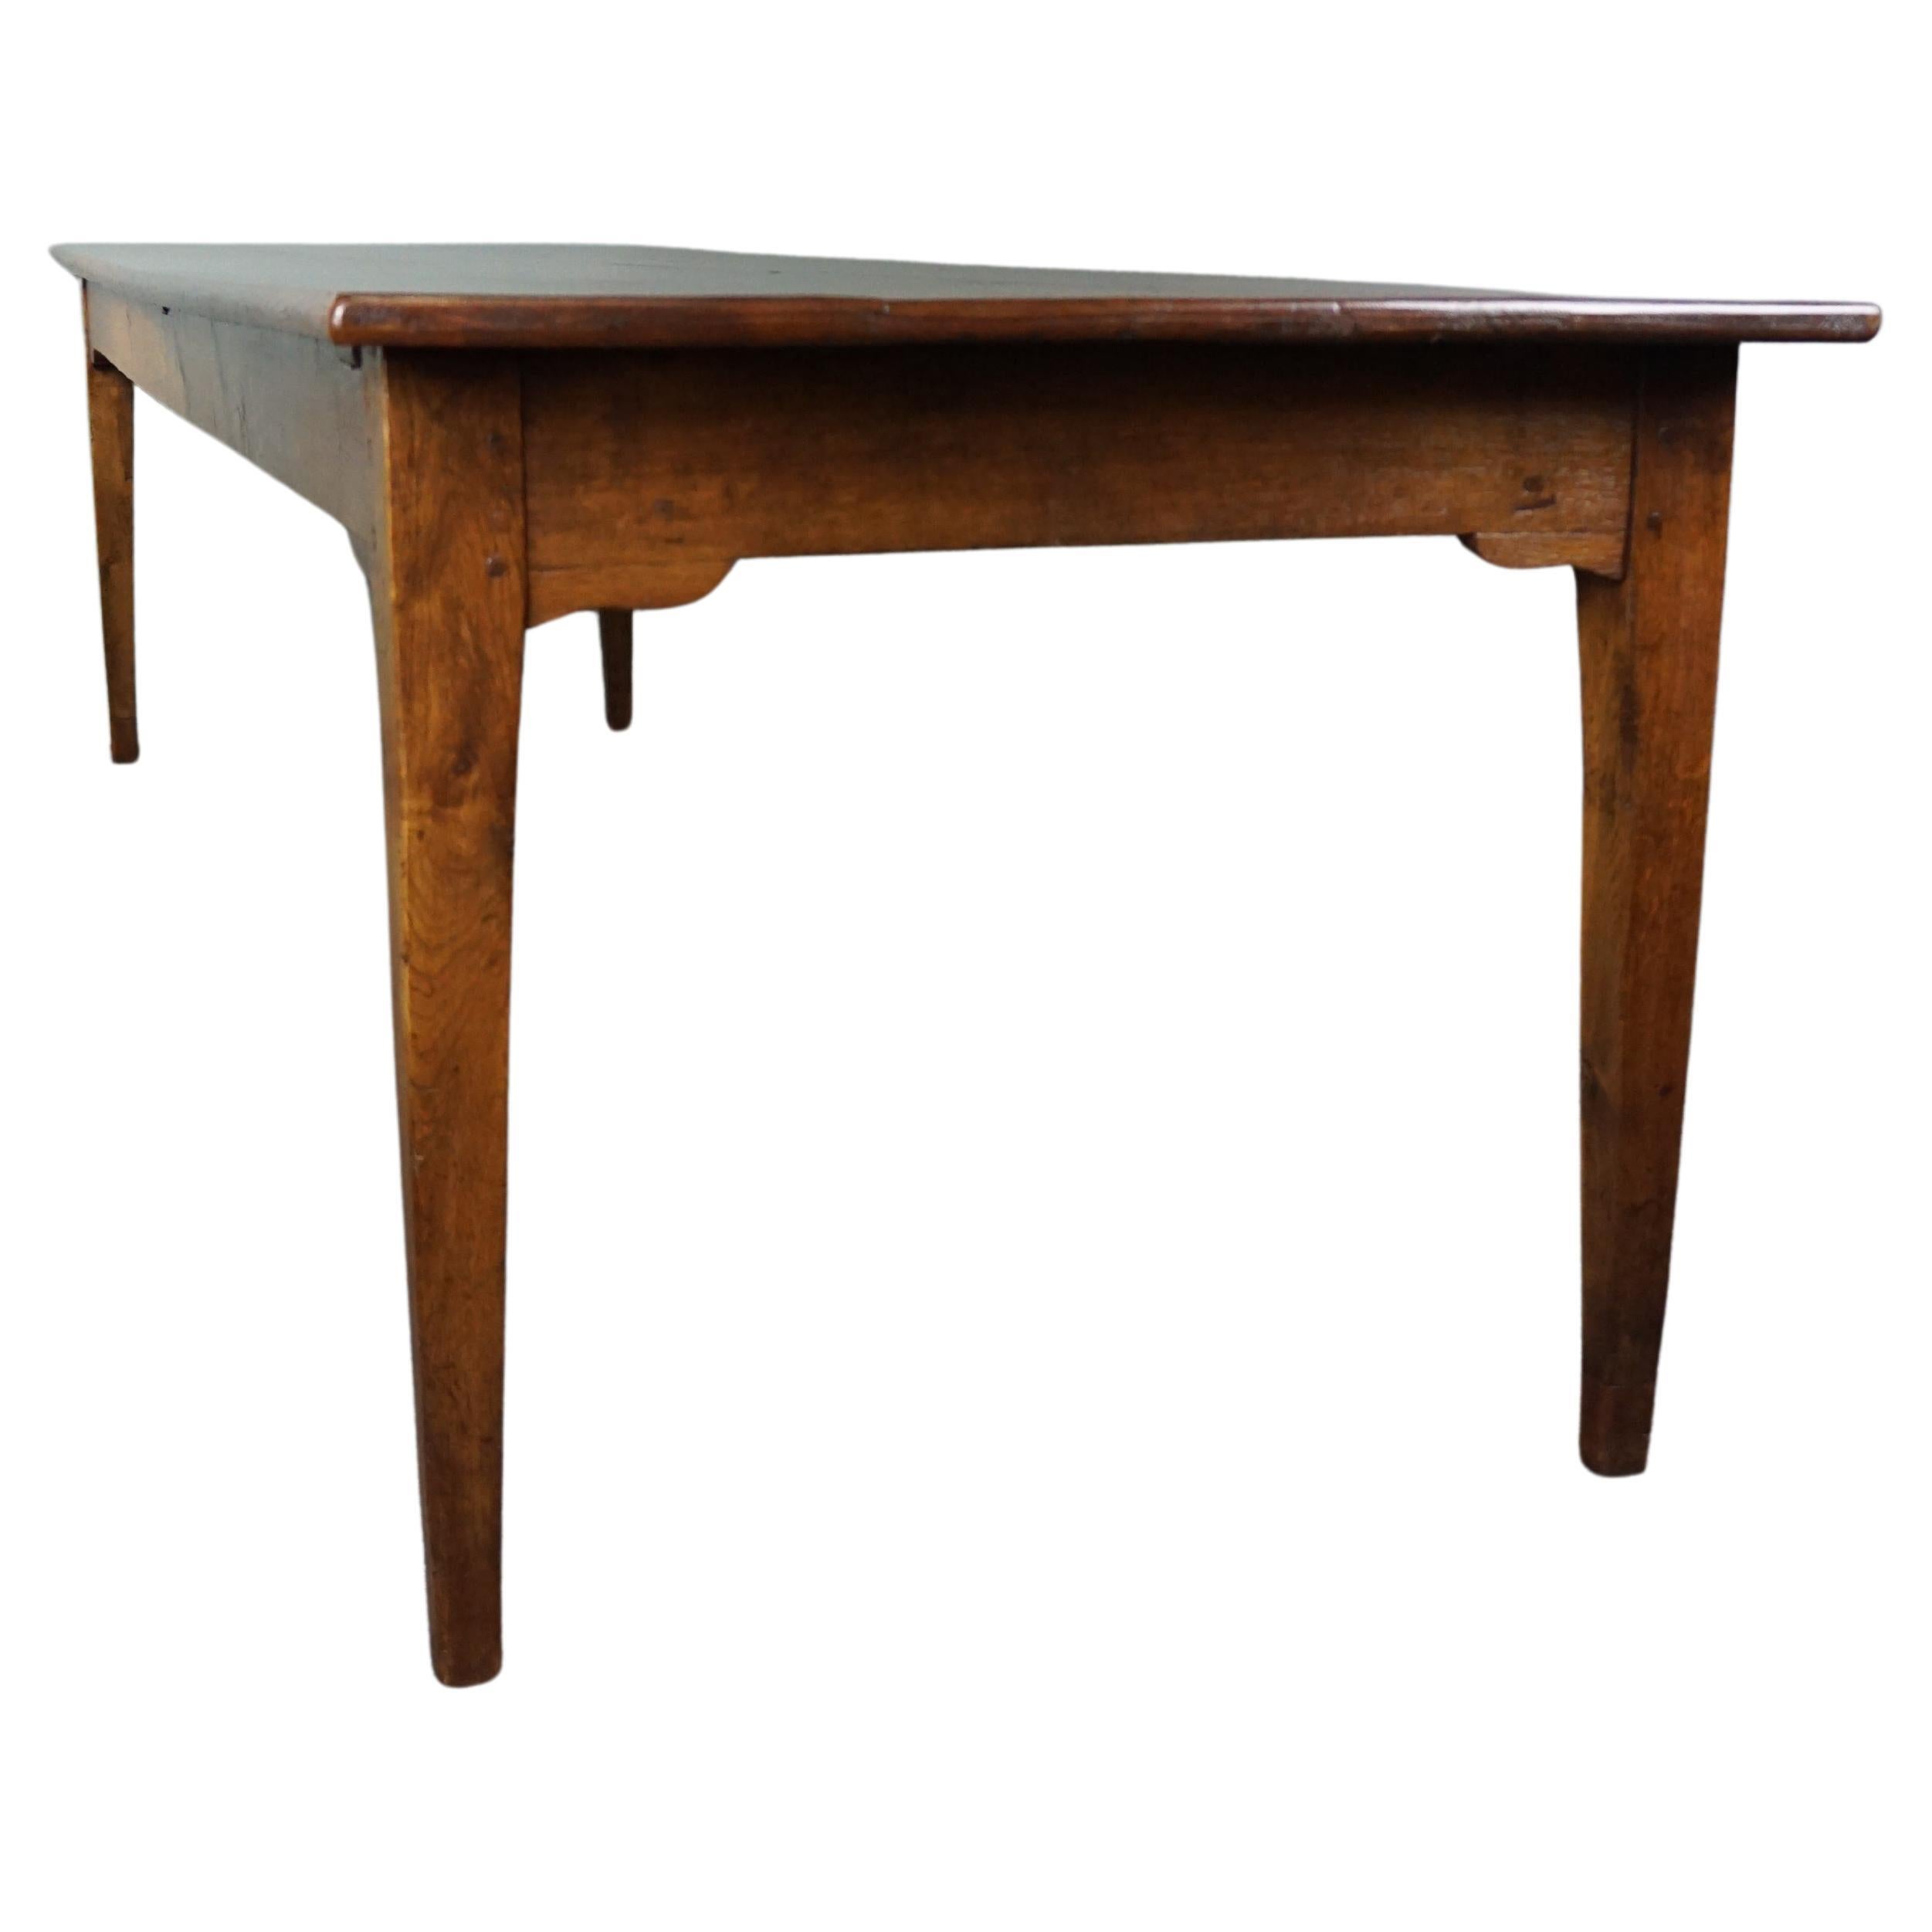 Unique long antique French oak early 19th-century dining table